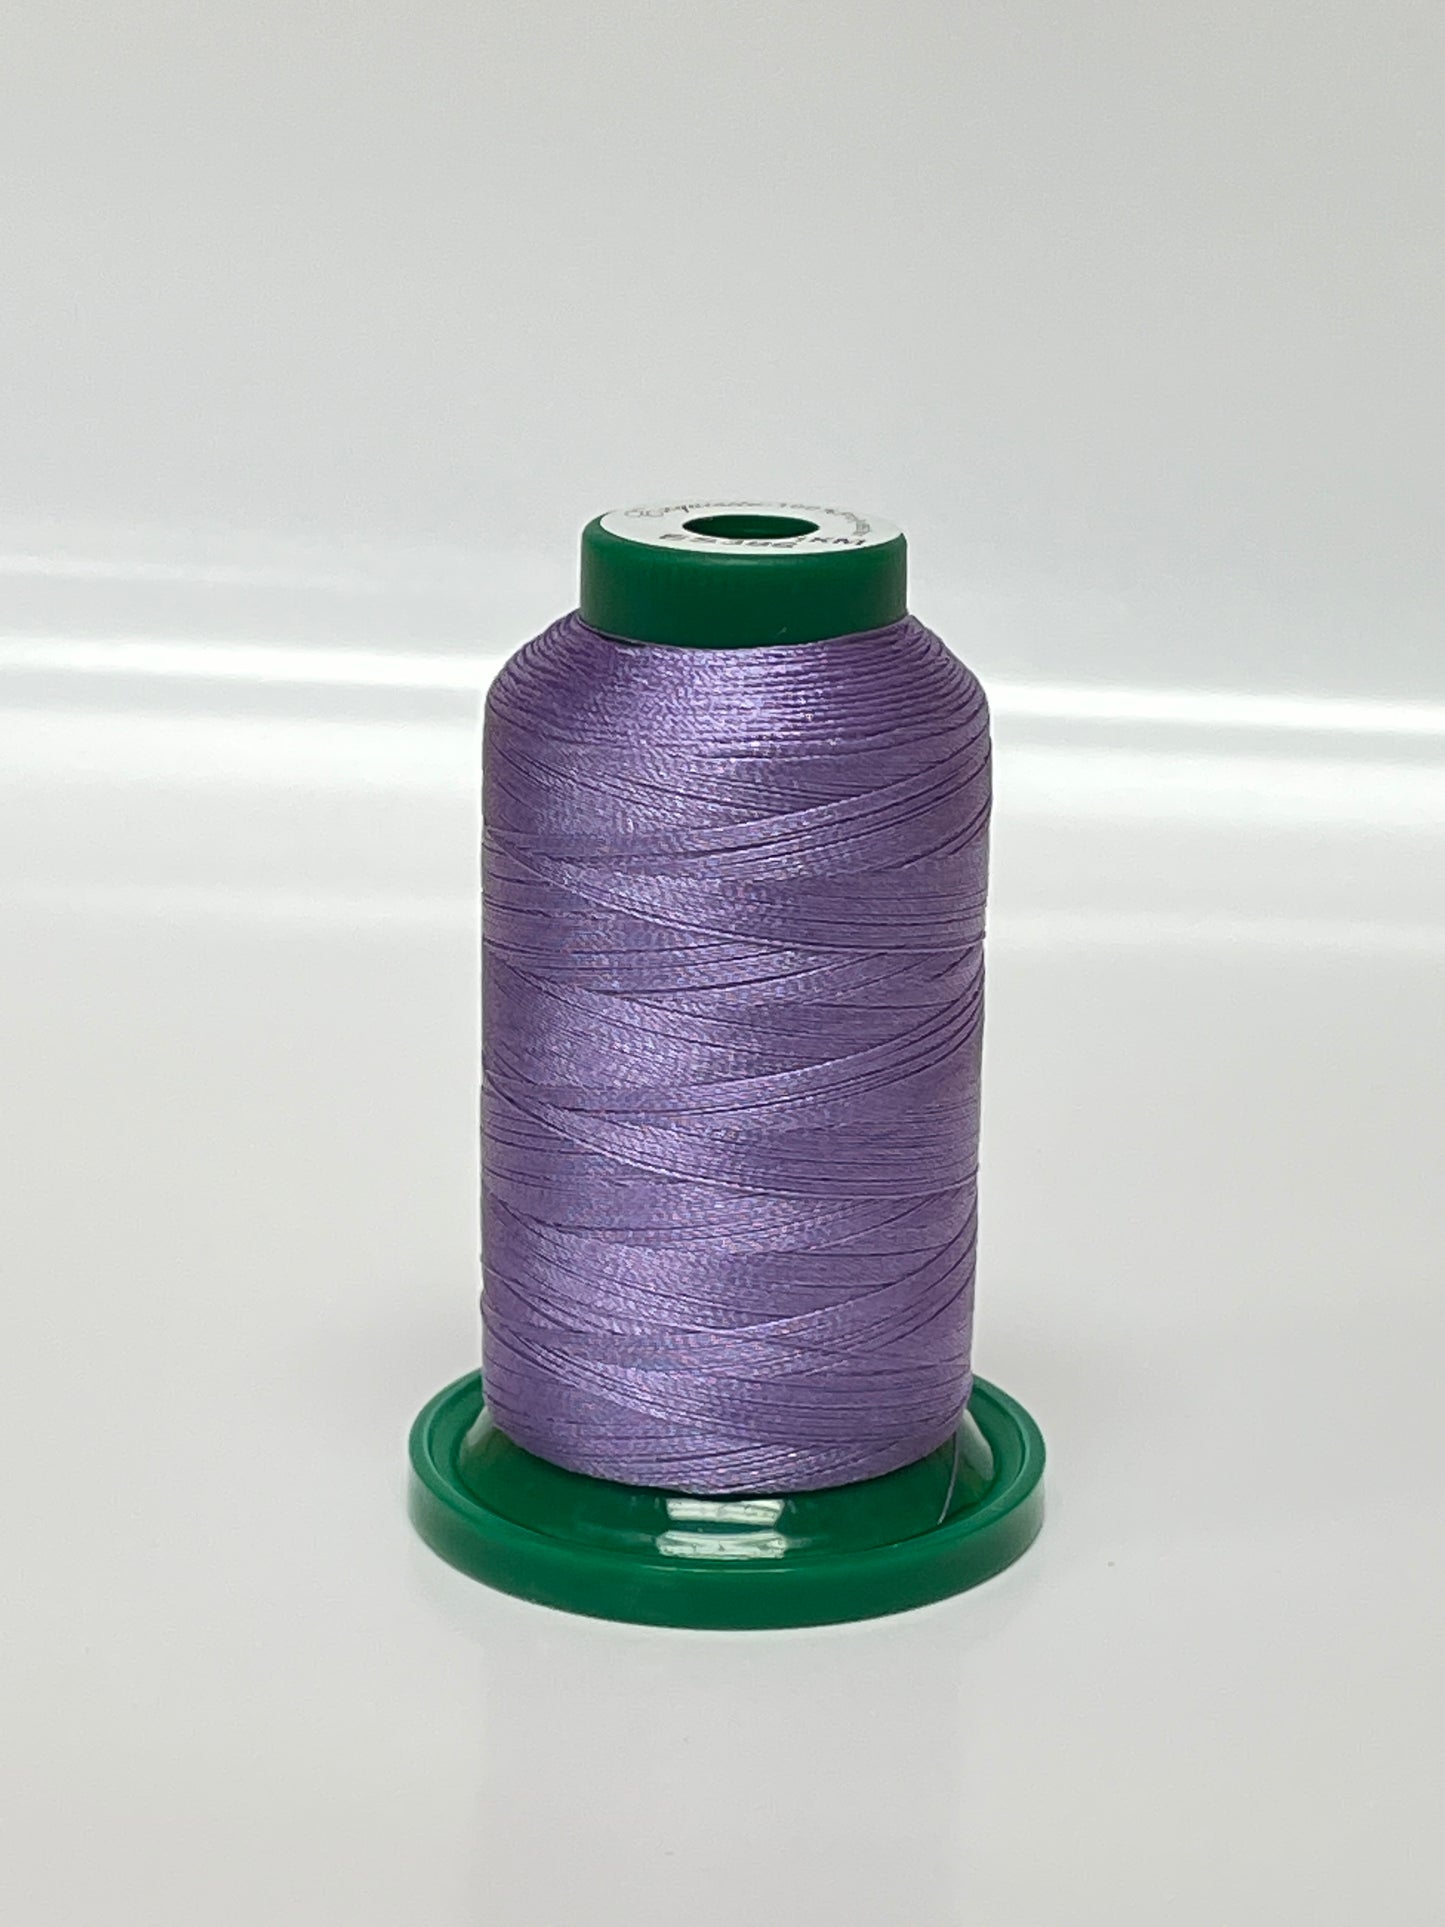 Exquisite Embroidery Thread - Purples